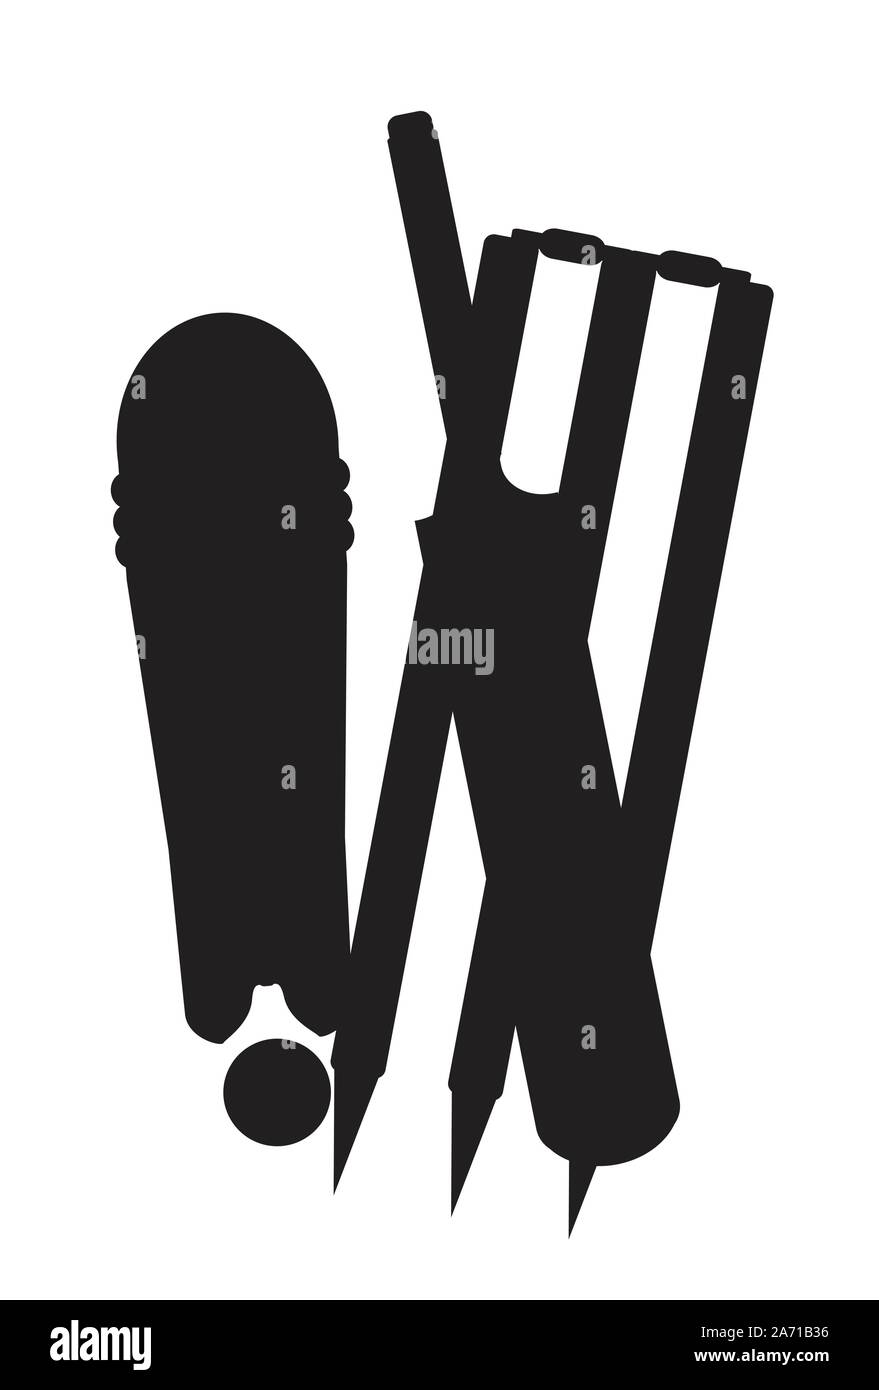 A set of cricket stumps bat and ball in black silhouette isolated on a white background Stock Vector